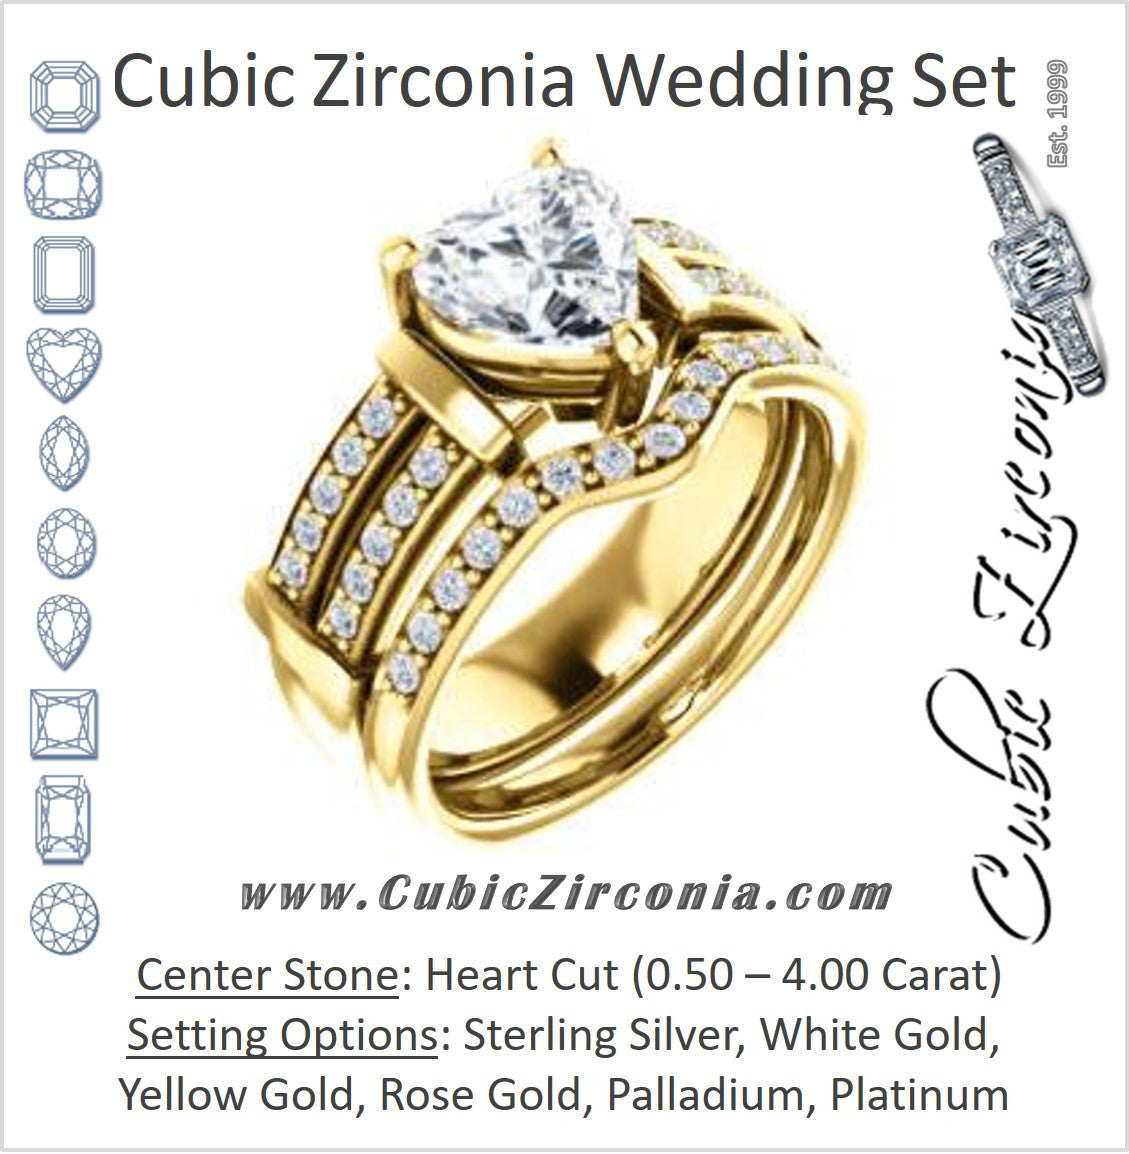 CZ Wedding Set, featuring The Rachana engagement ring (Customizable Heart Cut Design with Wide Split-Pavé Band and Euro Shank)